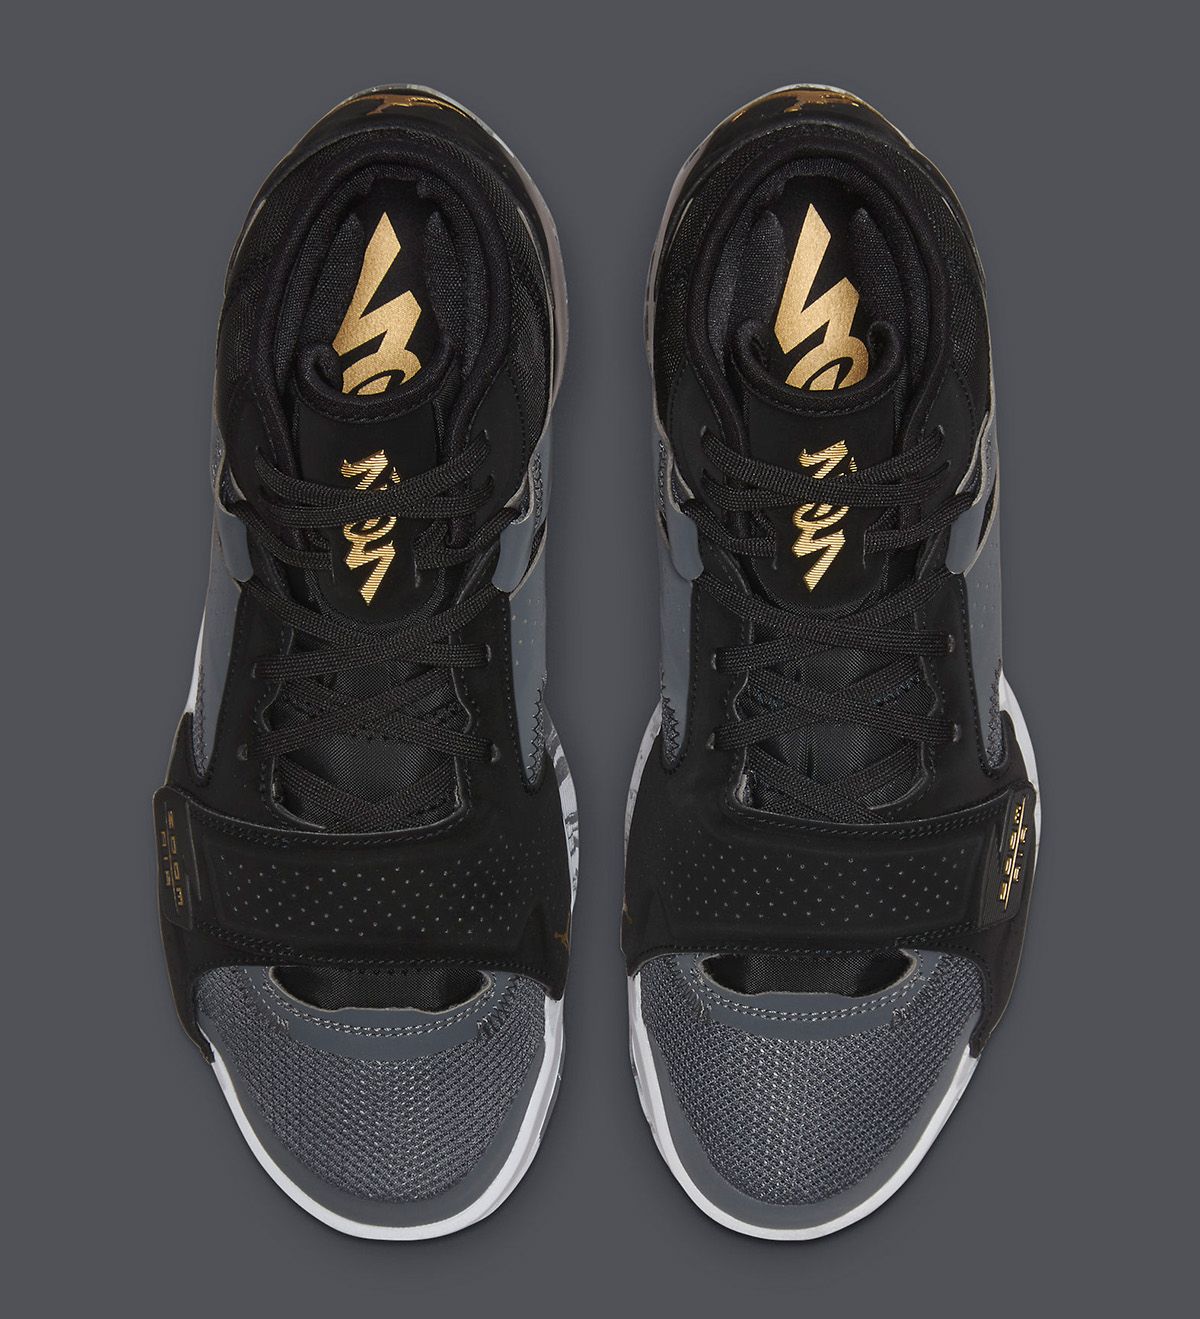 The Jordan Zion 2 Appears in Grey, Black and Gold | HOUSE OF HEAT